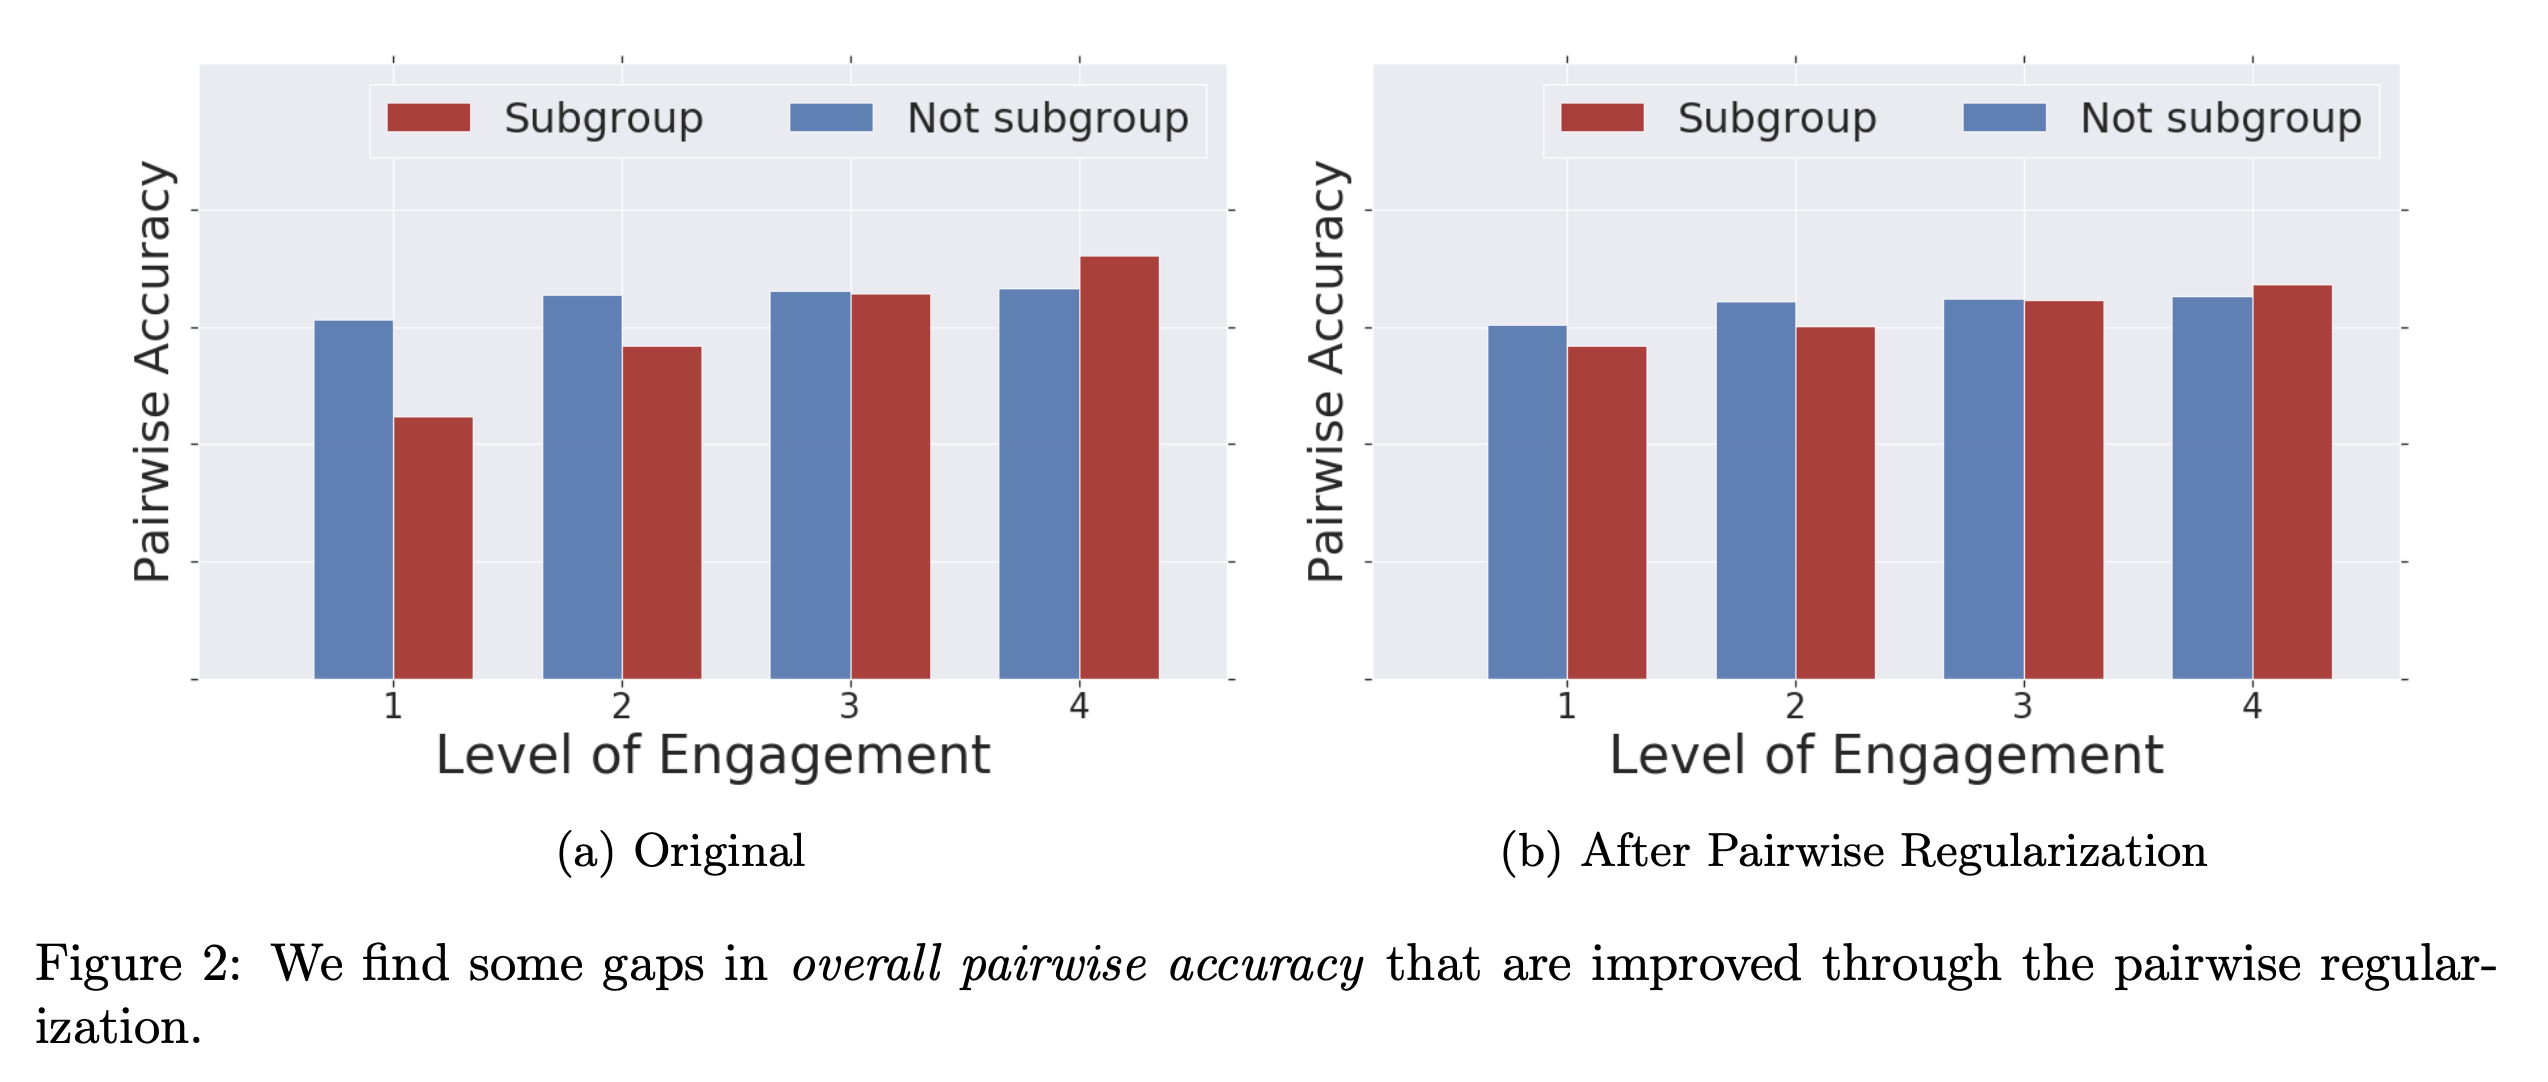 We find some gaps in overall pairwise accuracy that are improved through the pairwise regularization.